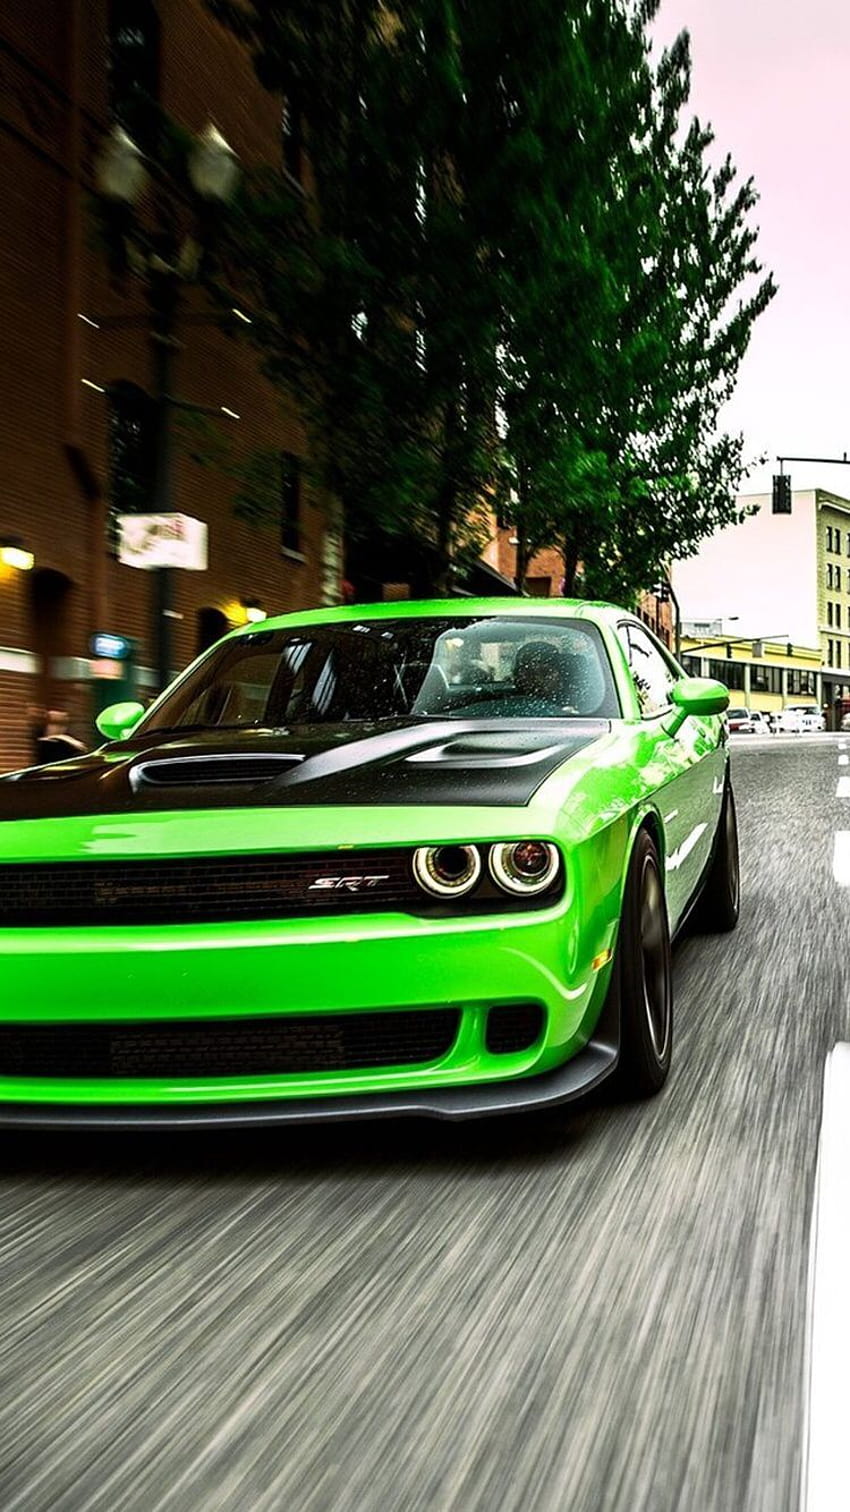 Checkout this for your iPhone: http://zedge/w10425228?src=ios&v=2.2 via @Zedge, lime green dodge challenger HD phone wallpaper